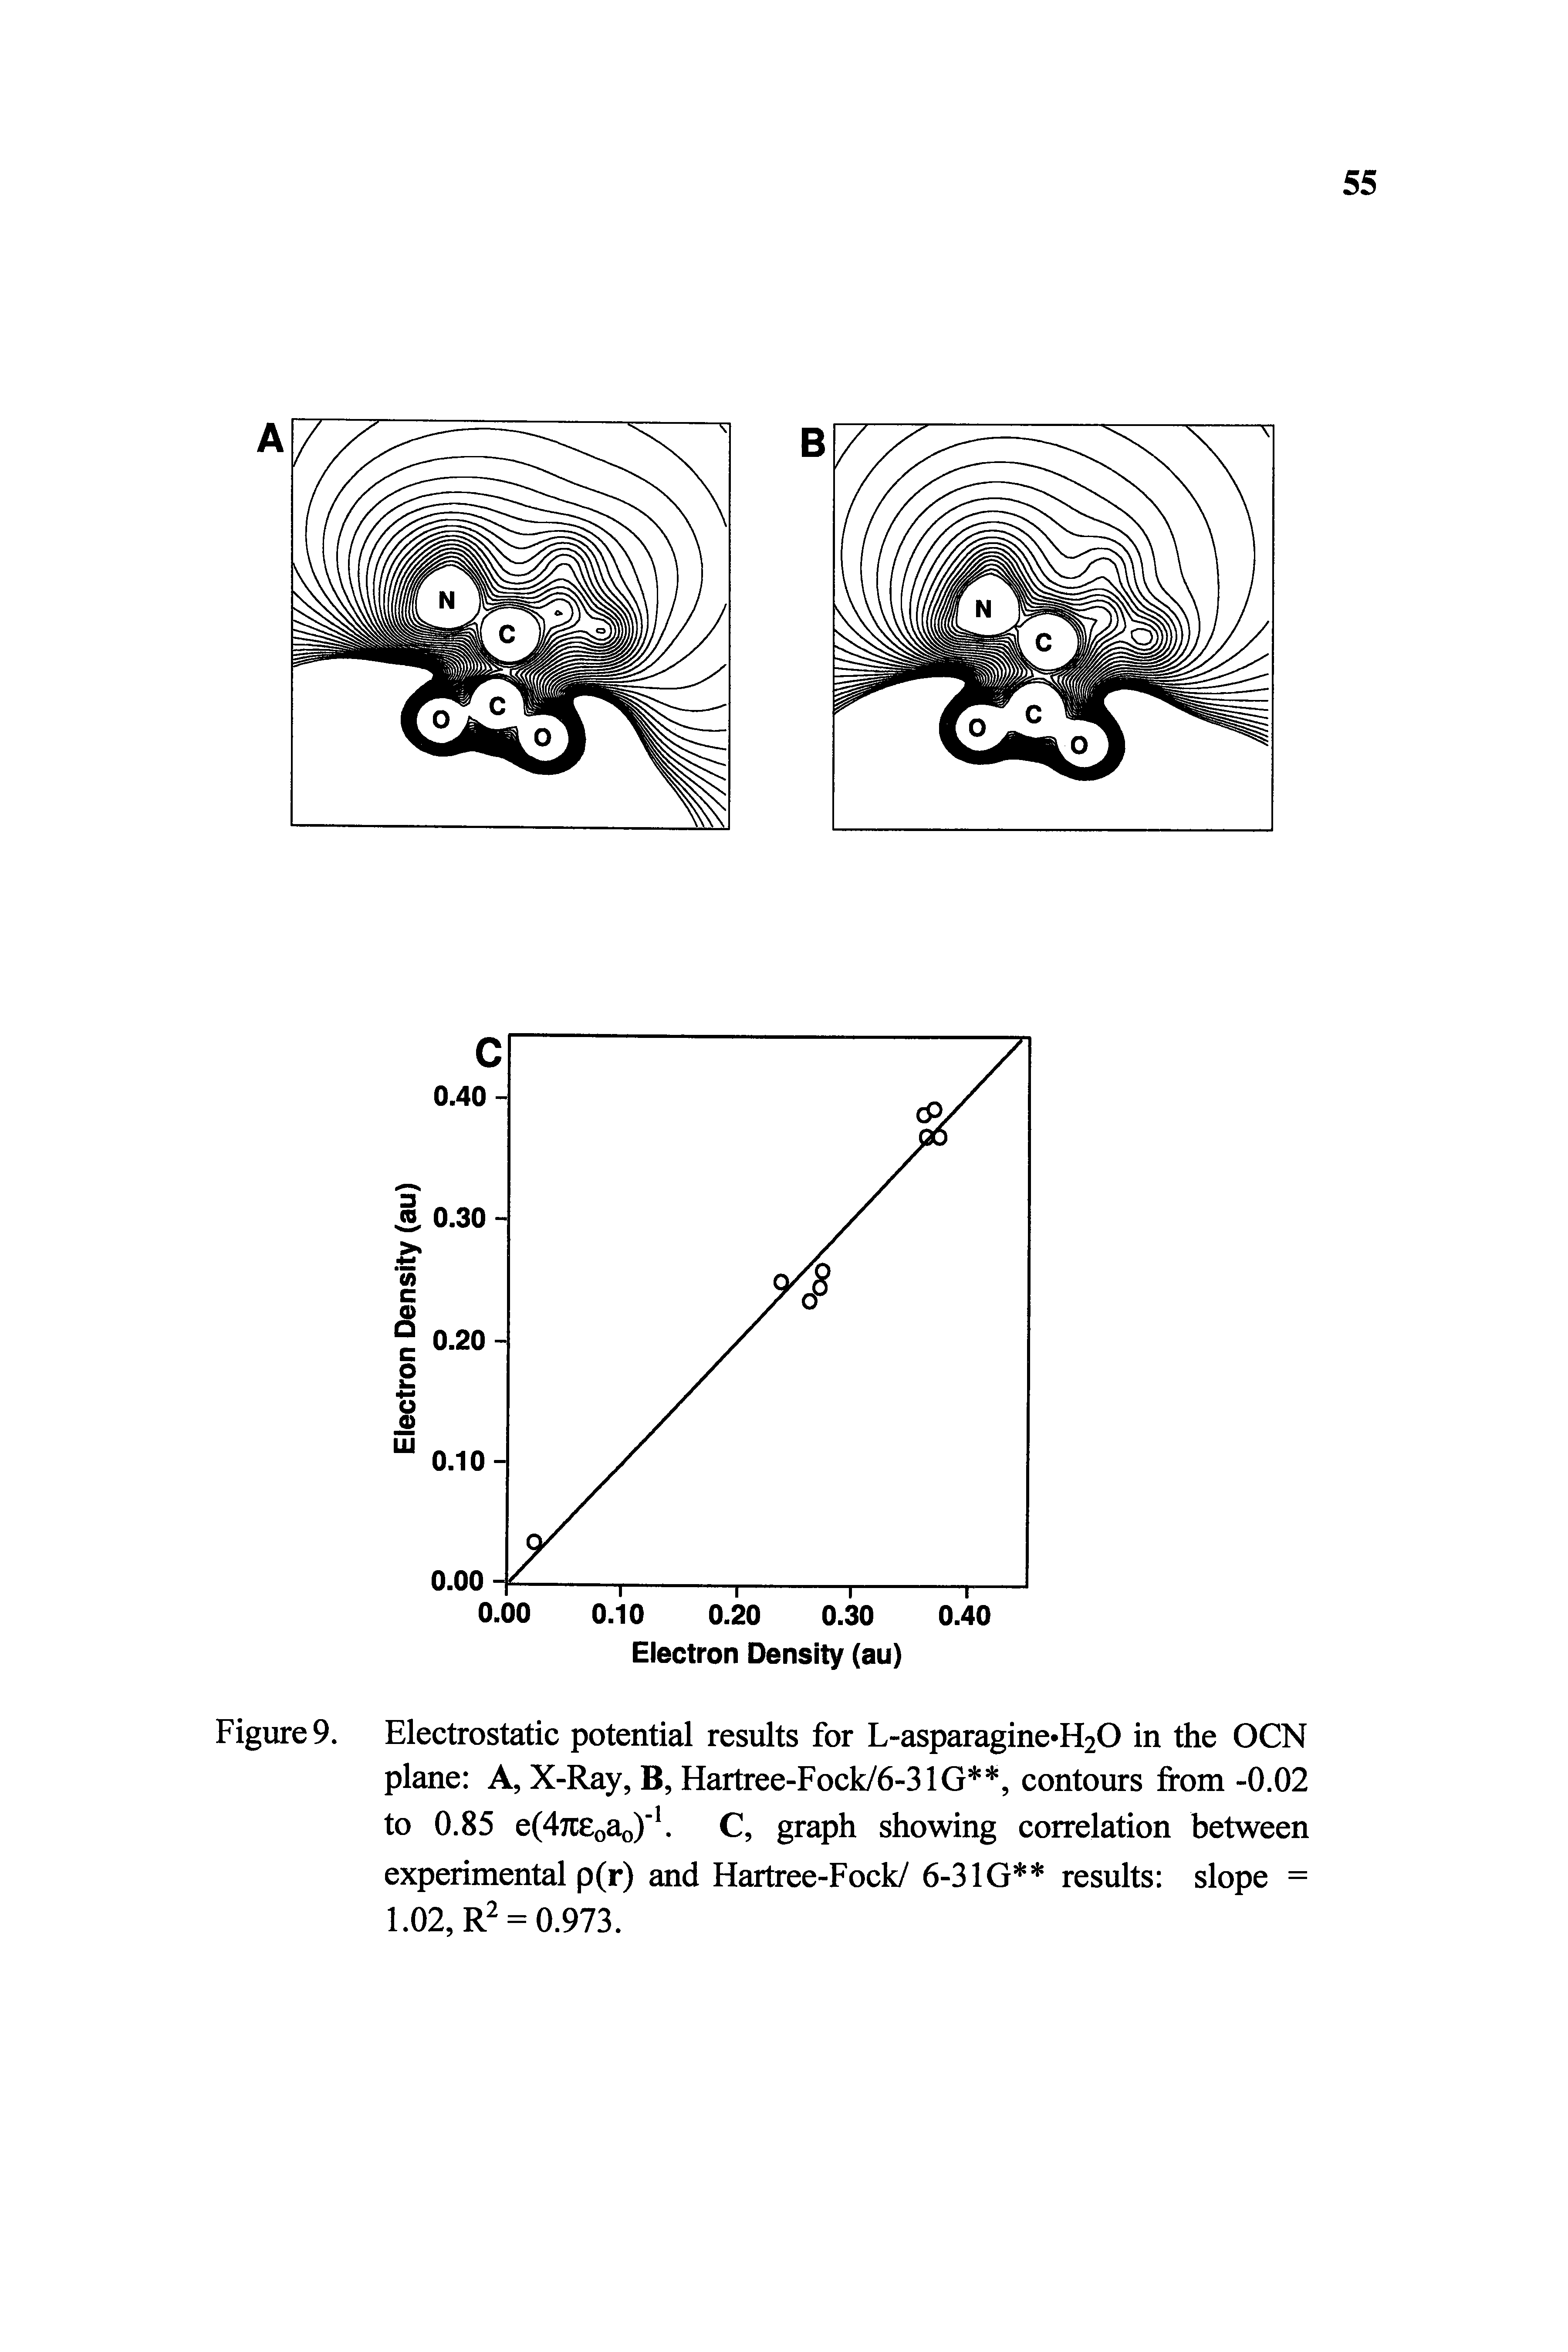 Figure 9. Electrostatic potential results for L-asparagine H20 in the OCN plane A, X-Ray, B, Hartree-Fock/6-31G, contours from -0.02 to 0.85 e(47ce0a0) 1. C, graph showing correlation between experimental p(r) and Hartree-Fock/ 6-31G results slope = 1.02, R2 = 0.973.